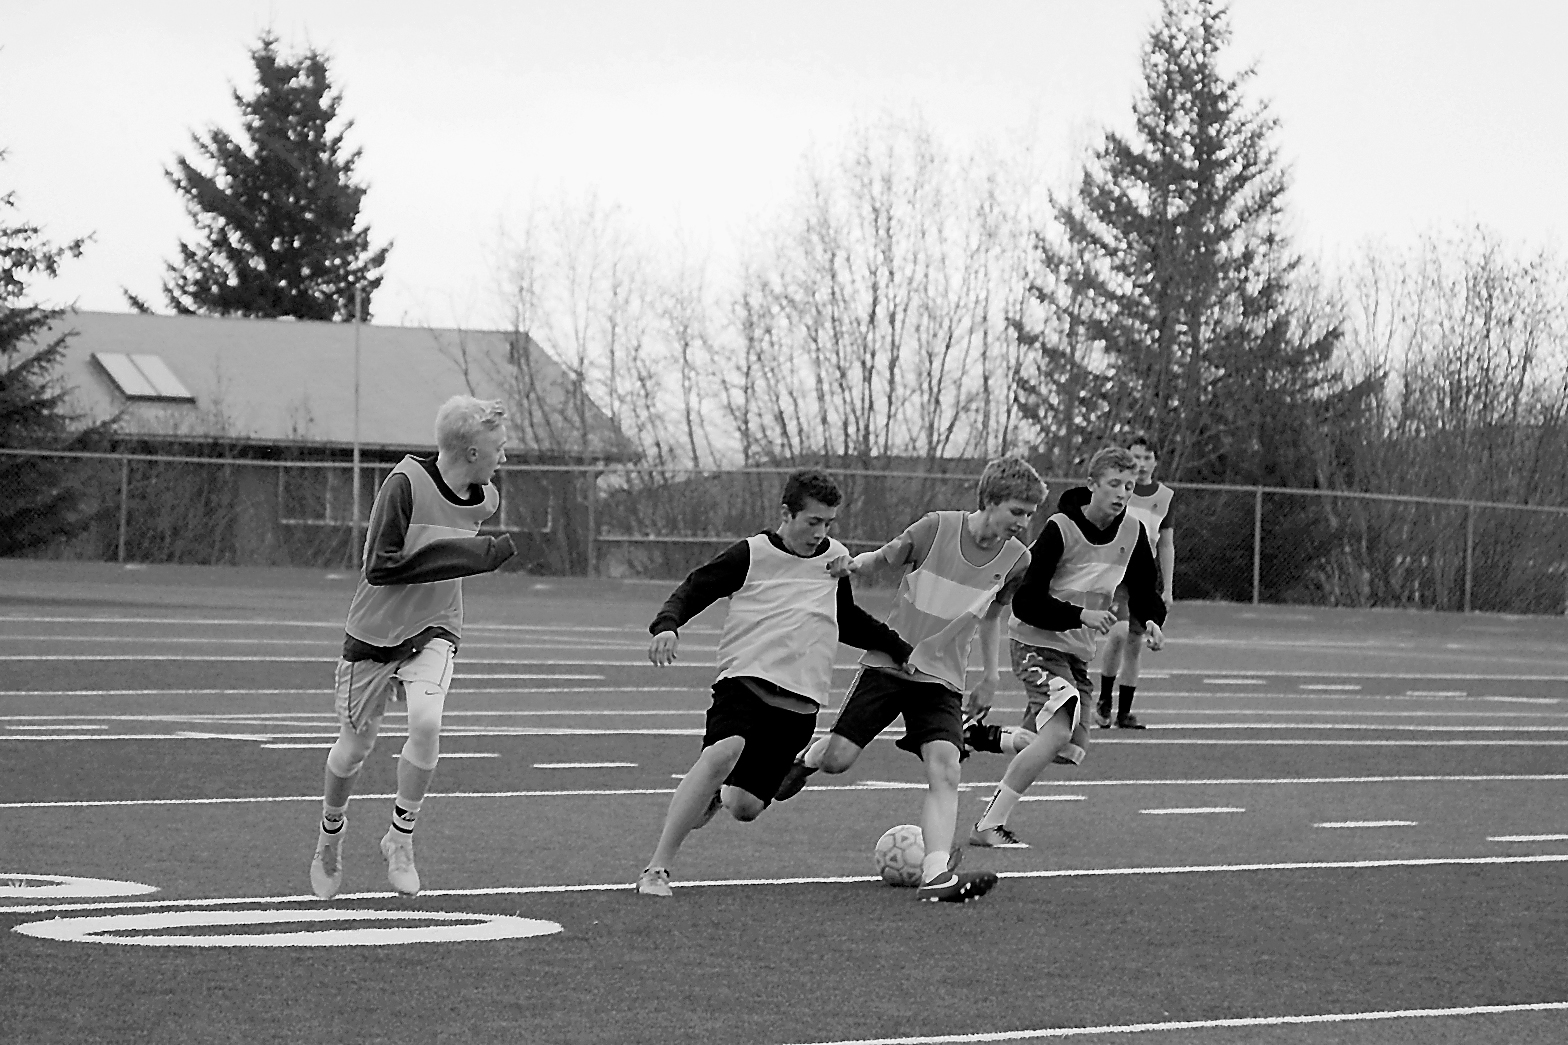 Players on the Mariner boys soccer team fight to claim posession of the ball during a rainy team scrimmage last Monday. From left are Charles Rohr, Jake Marquardt, Simon Dye, Koby Etzweiler and Timothy Blakely.